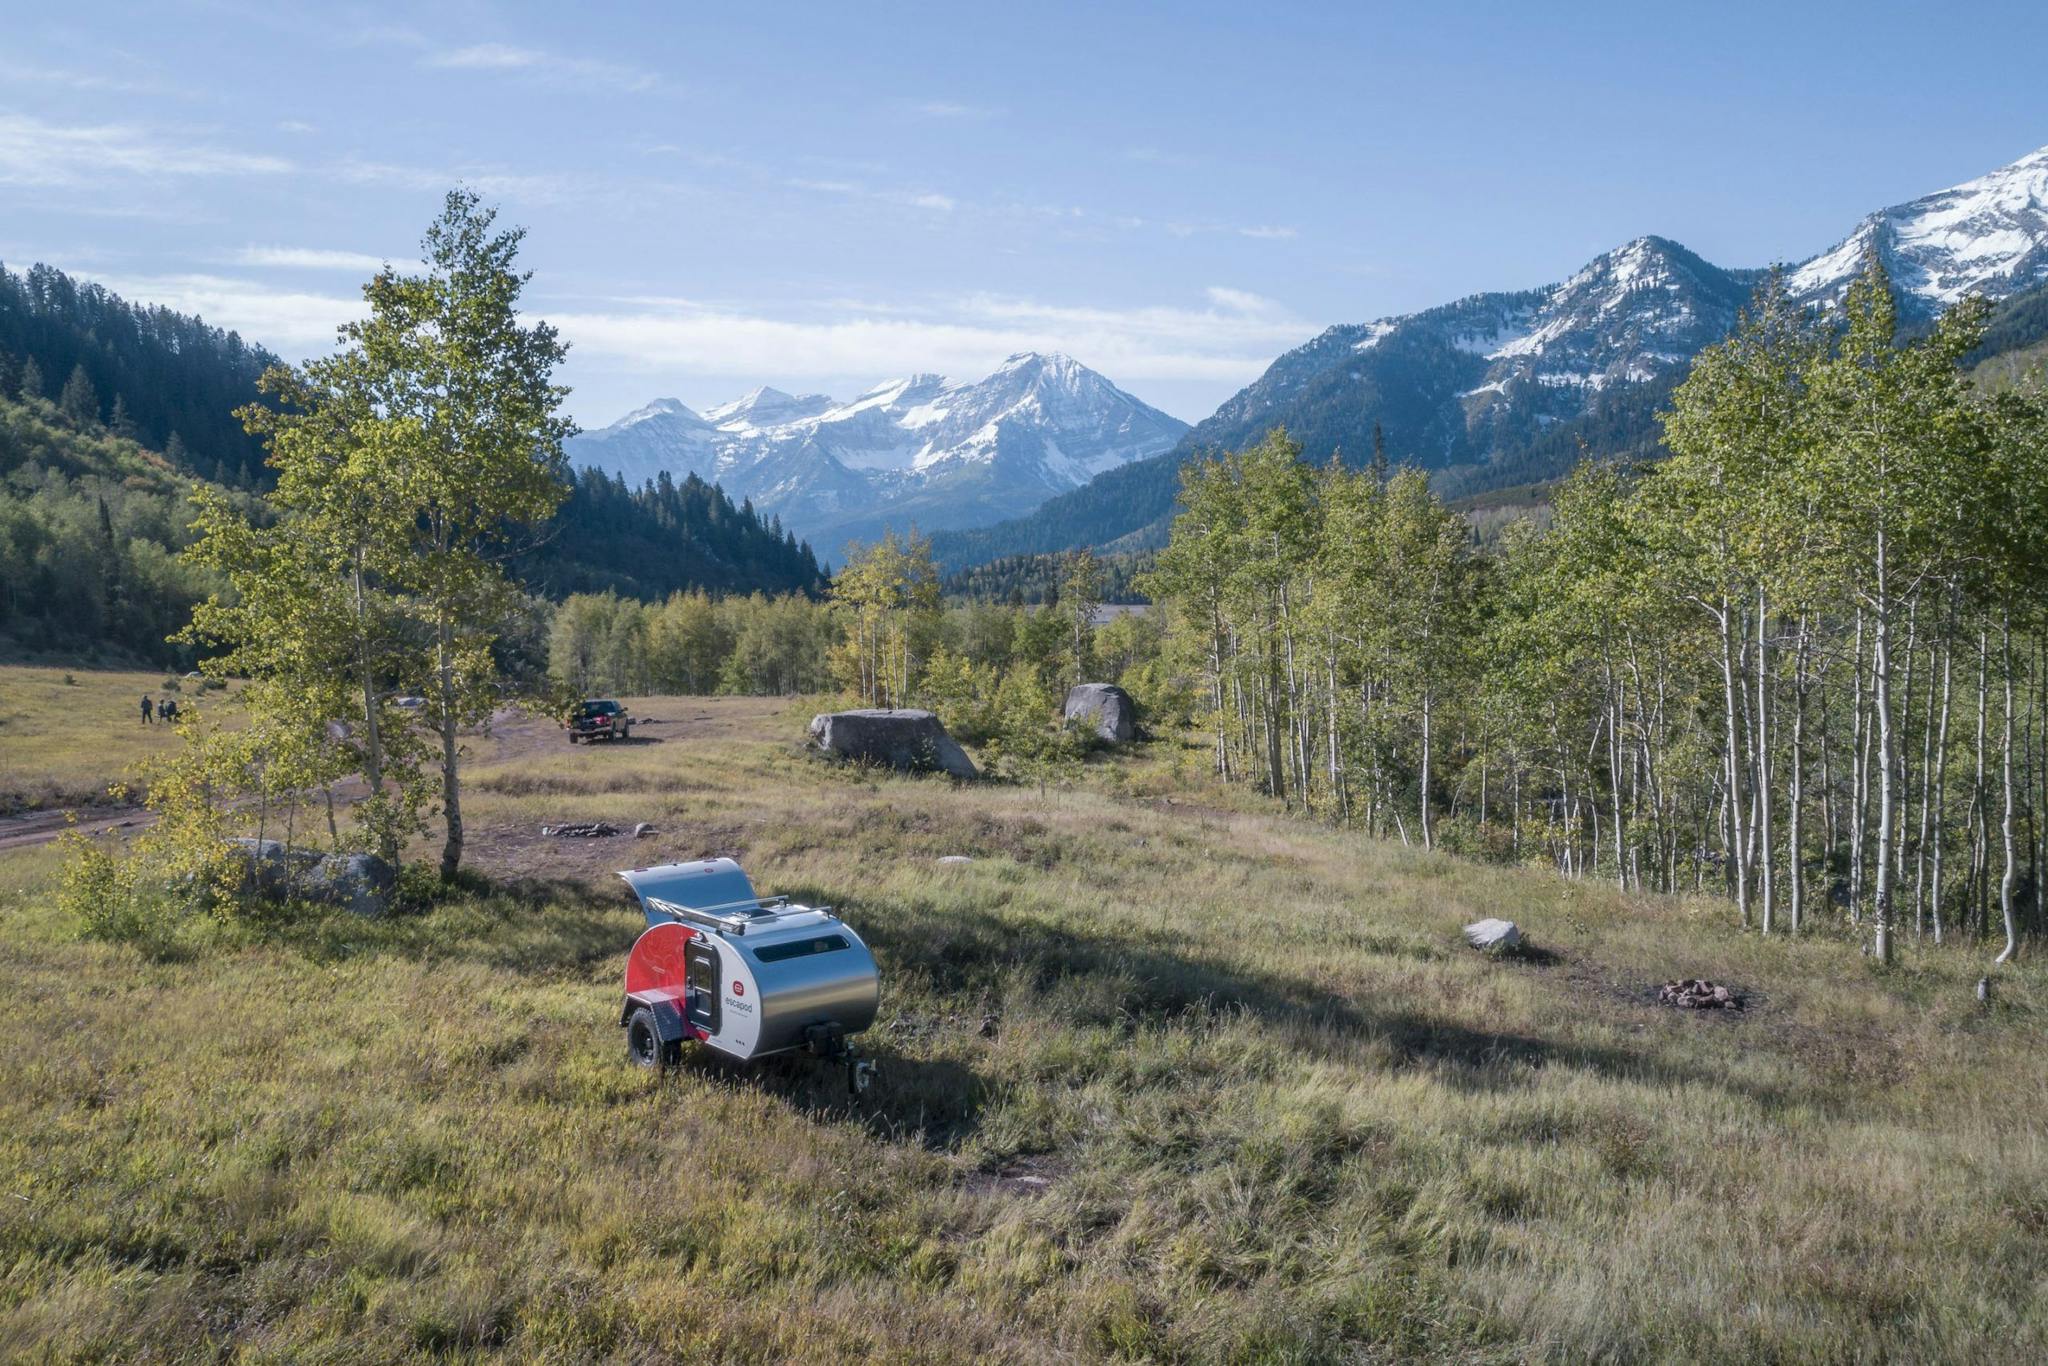 A white and red teardrop camper, in a remote area with trees and mountains in the background.